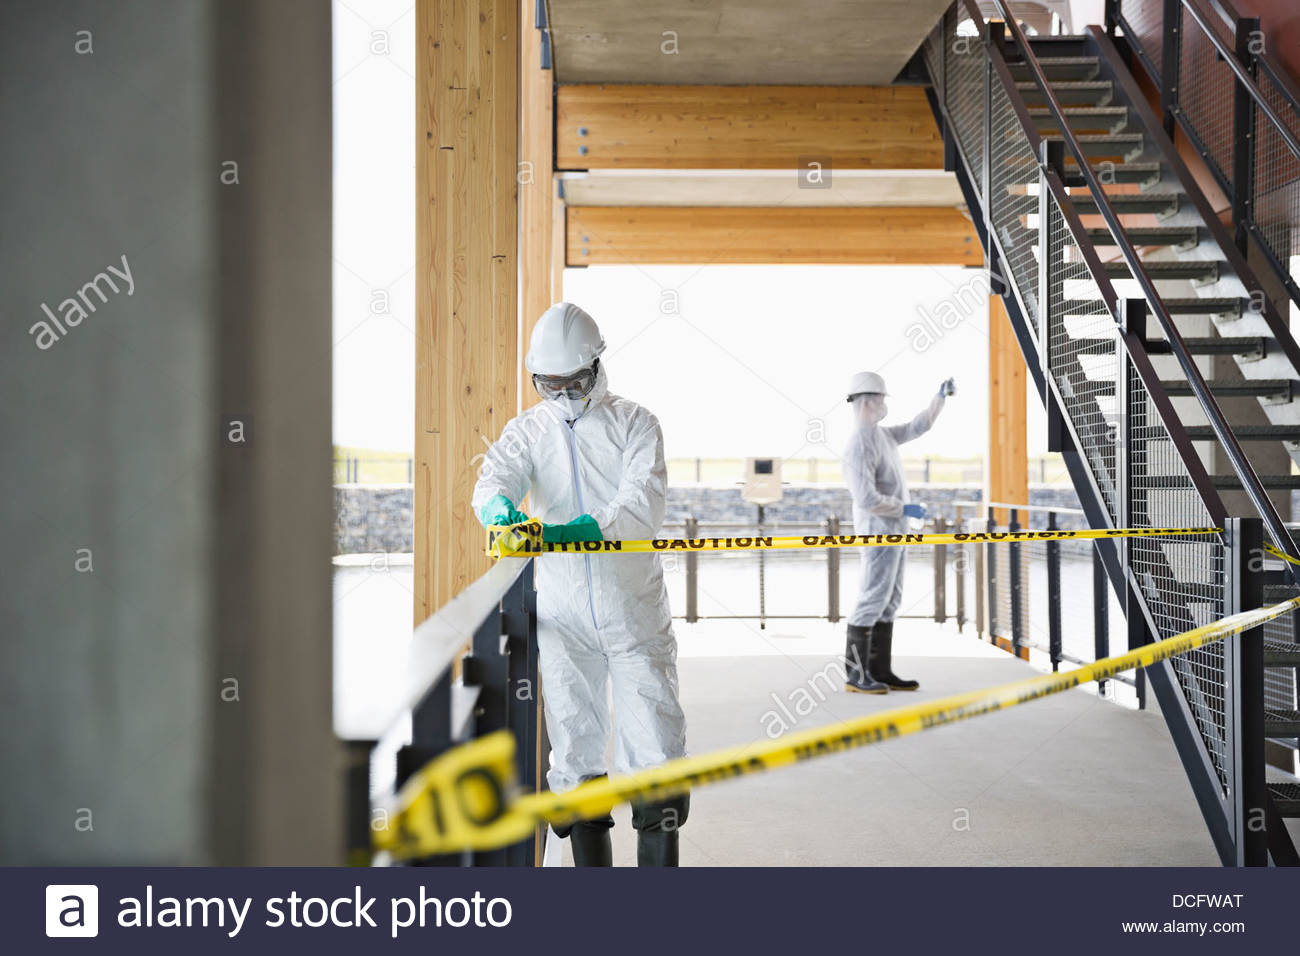 Water technicians blocking off water access Stock Photo